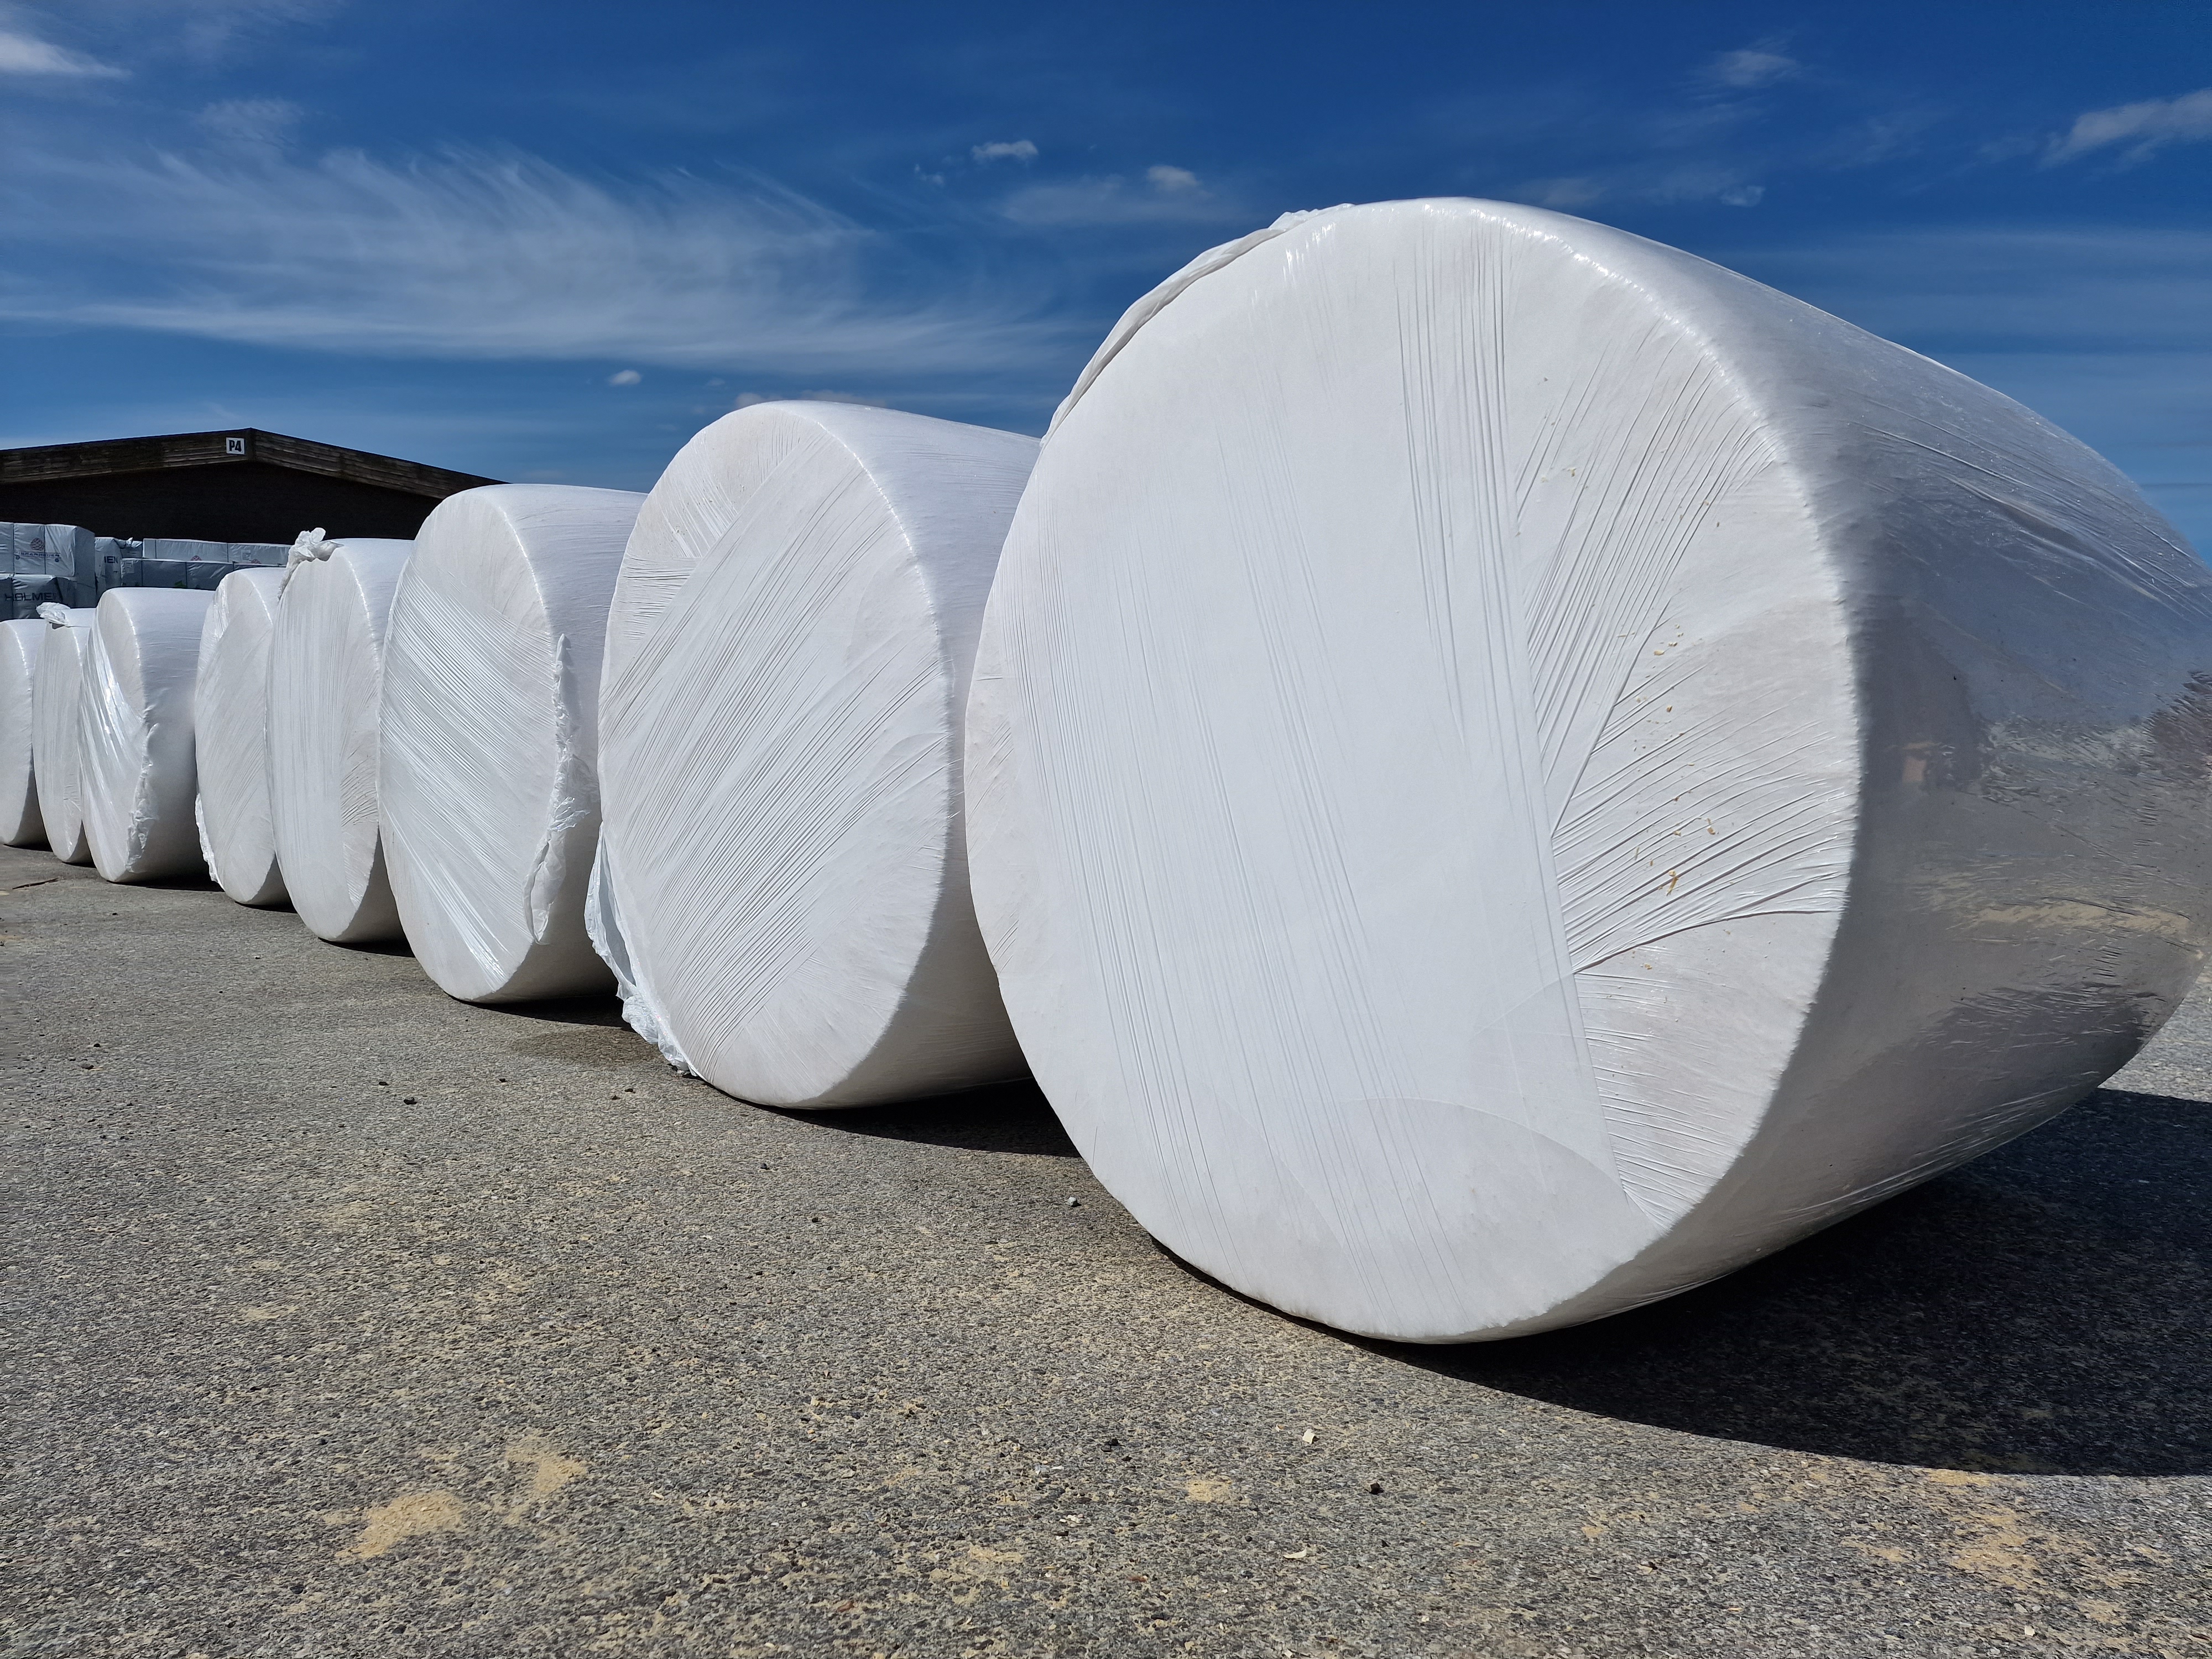 A row of white round bales lying on their round side, concrete flooring and blue skies.